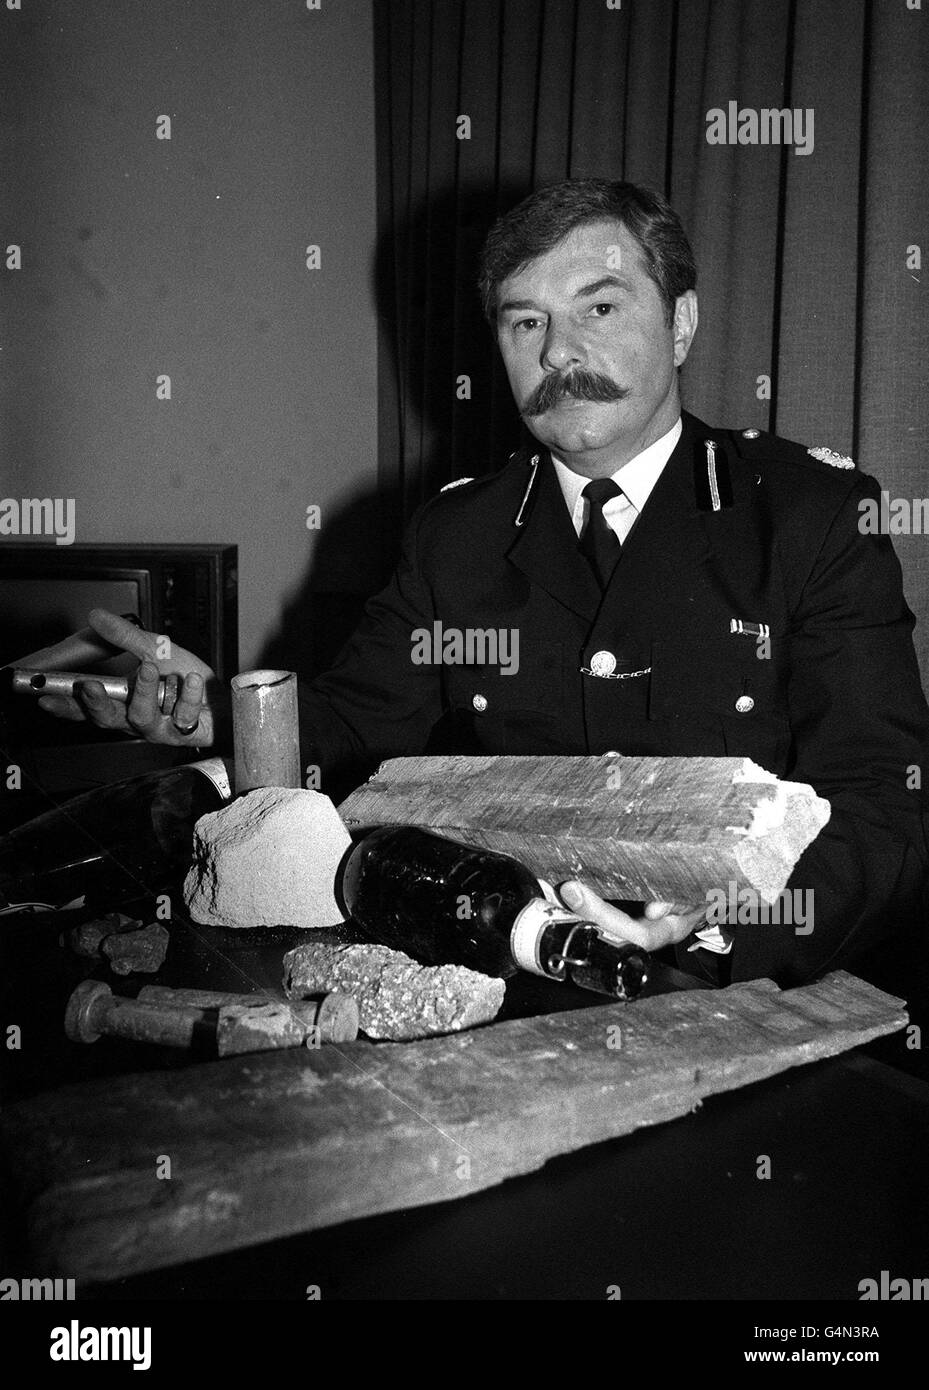 Police Commander Bernard Lockhurst with some of the missiles used during the anti-poll tax riots in central London, in which more than 40 people were injured and thousands of pounds worth of damage caused. Stock Photo